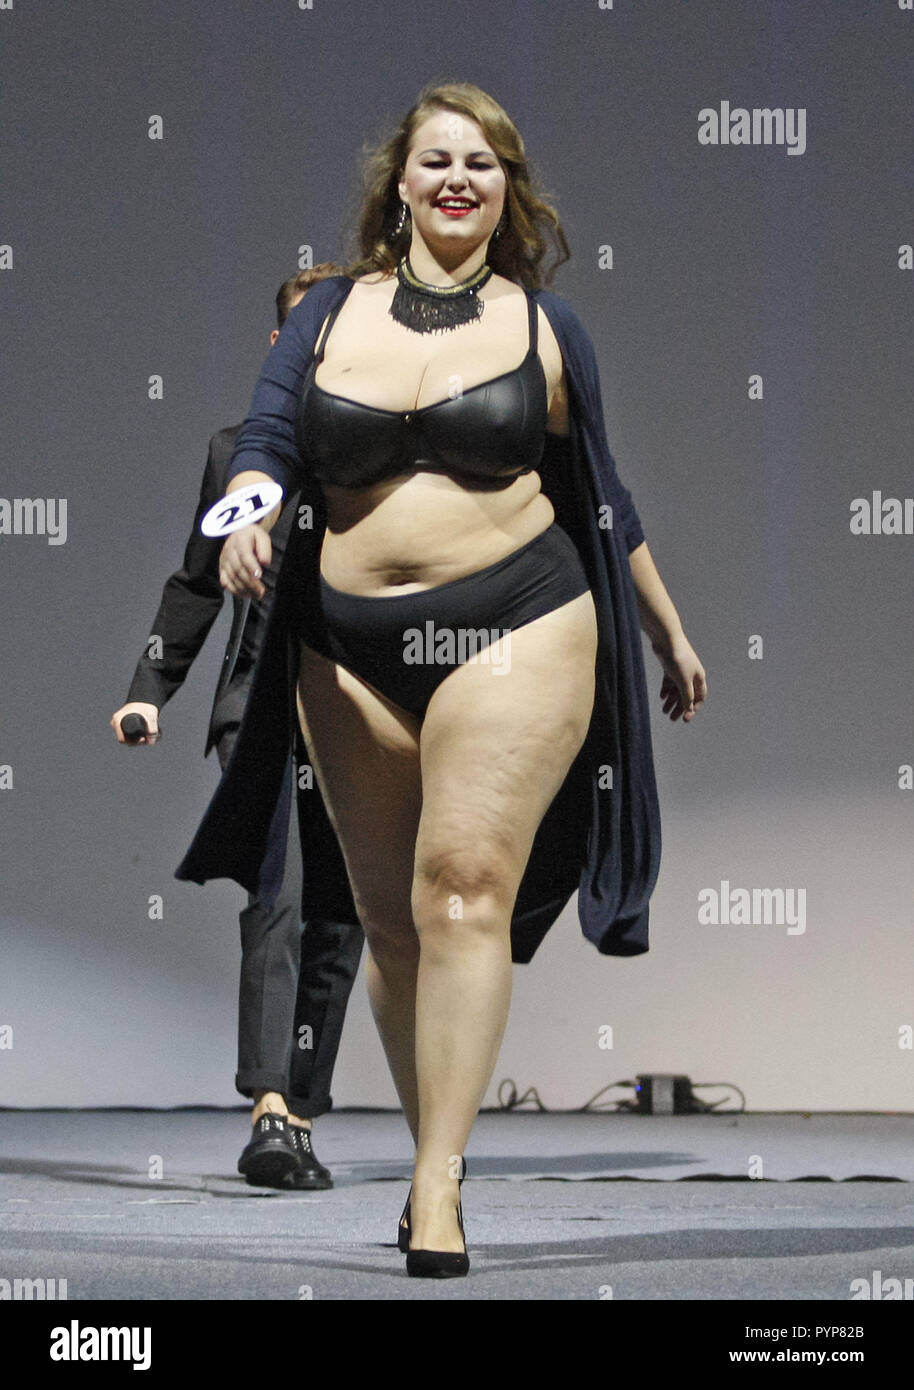 vulgaritet Information Til sandheden Kiev, Ukraine. 29th Oct, 2018. A contestant seen on stage during the ''Miss  Ukraine Plus Size'' beauty pageant in Kiev. 22 female contestants competed  in the contest, the first held in Ukraine,